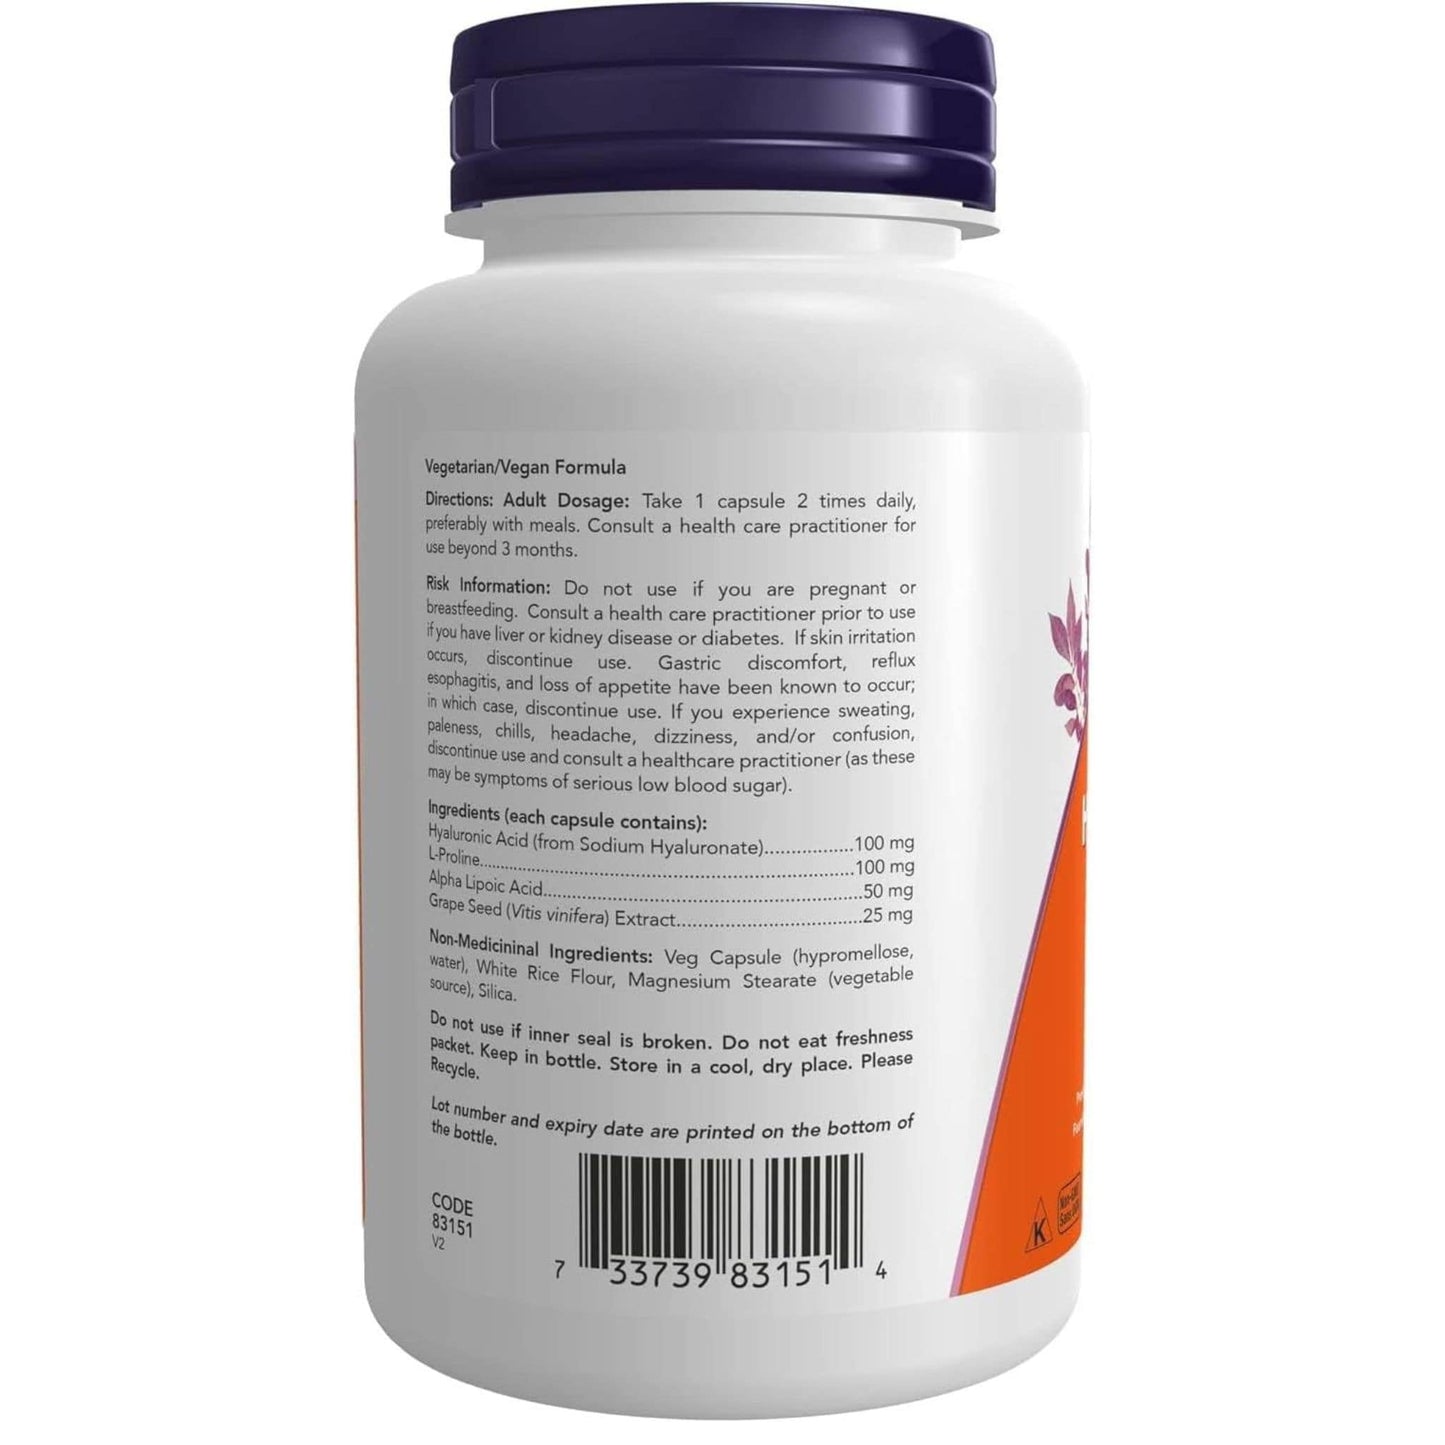 NOW Hyaluronic Acid 100mg with Antioxidants (Double Strength), 60 VCaps